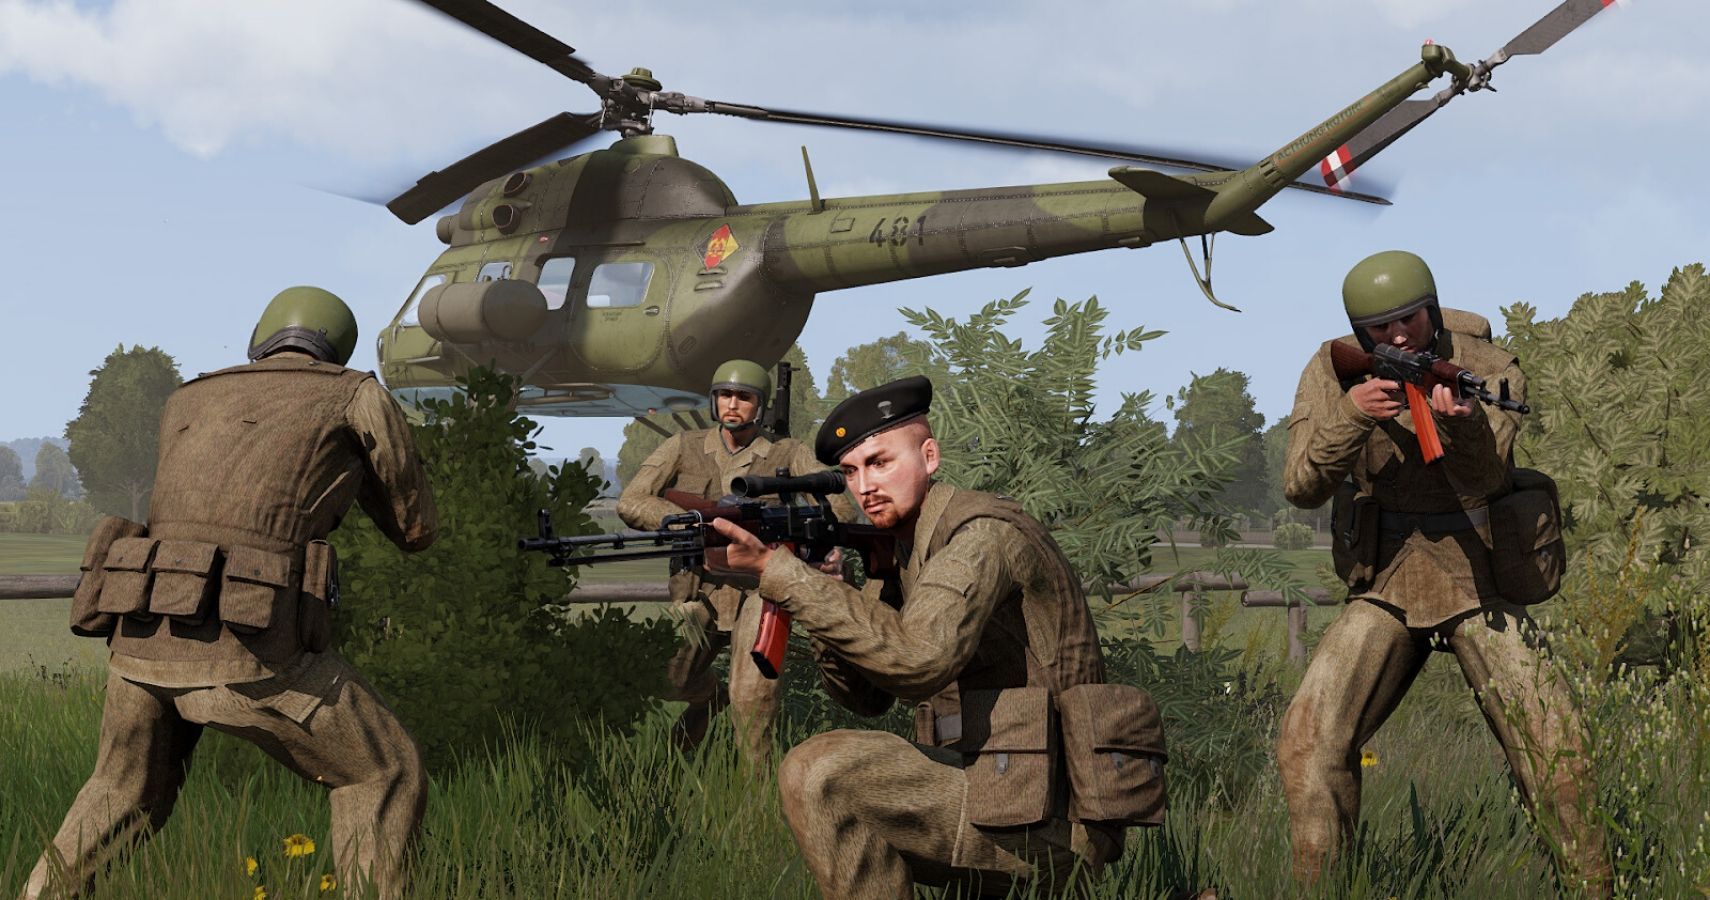 arma-3-creator-dlc-global-mobilization-cold-war-germany-update-1-2-is-live